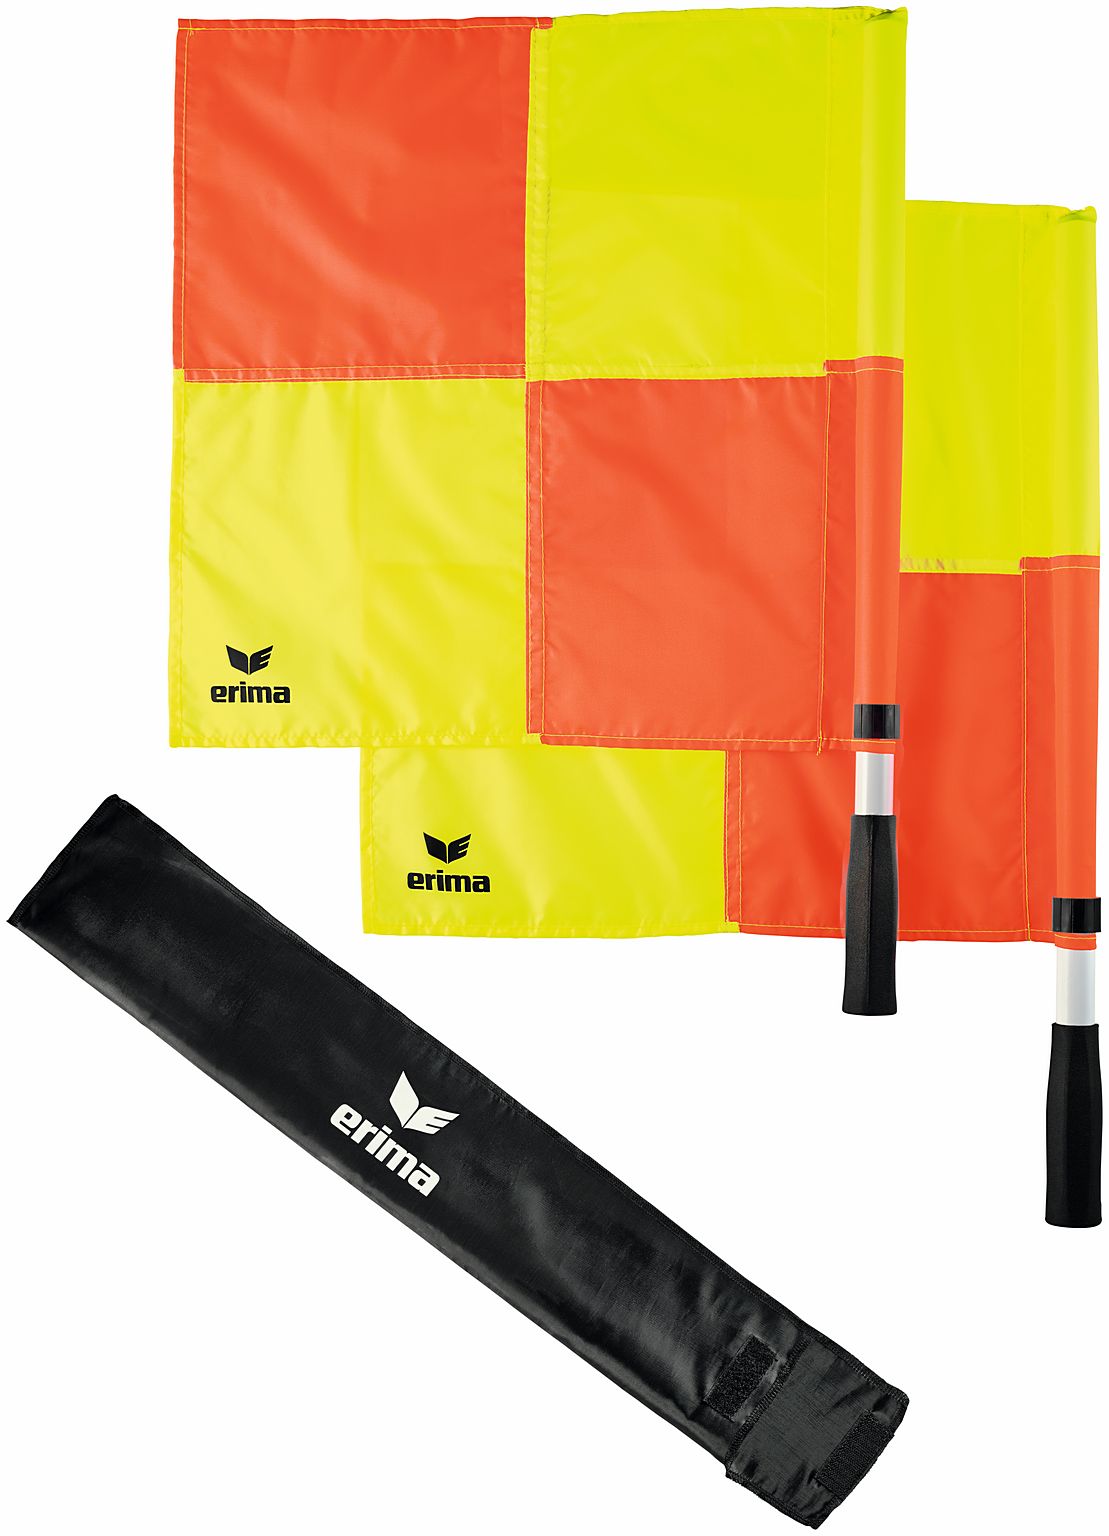 Referee flags